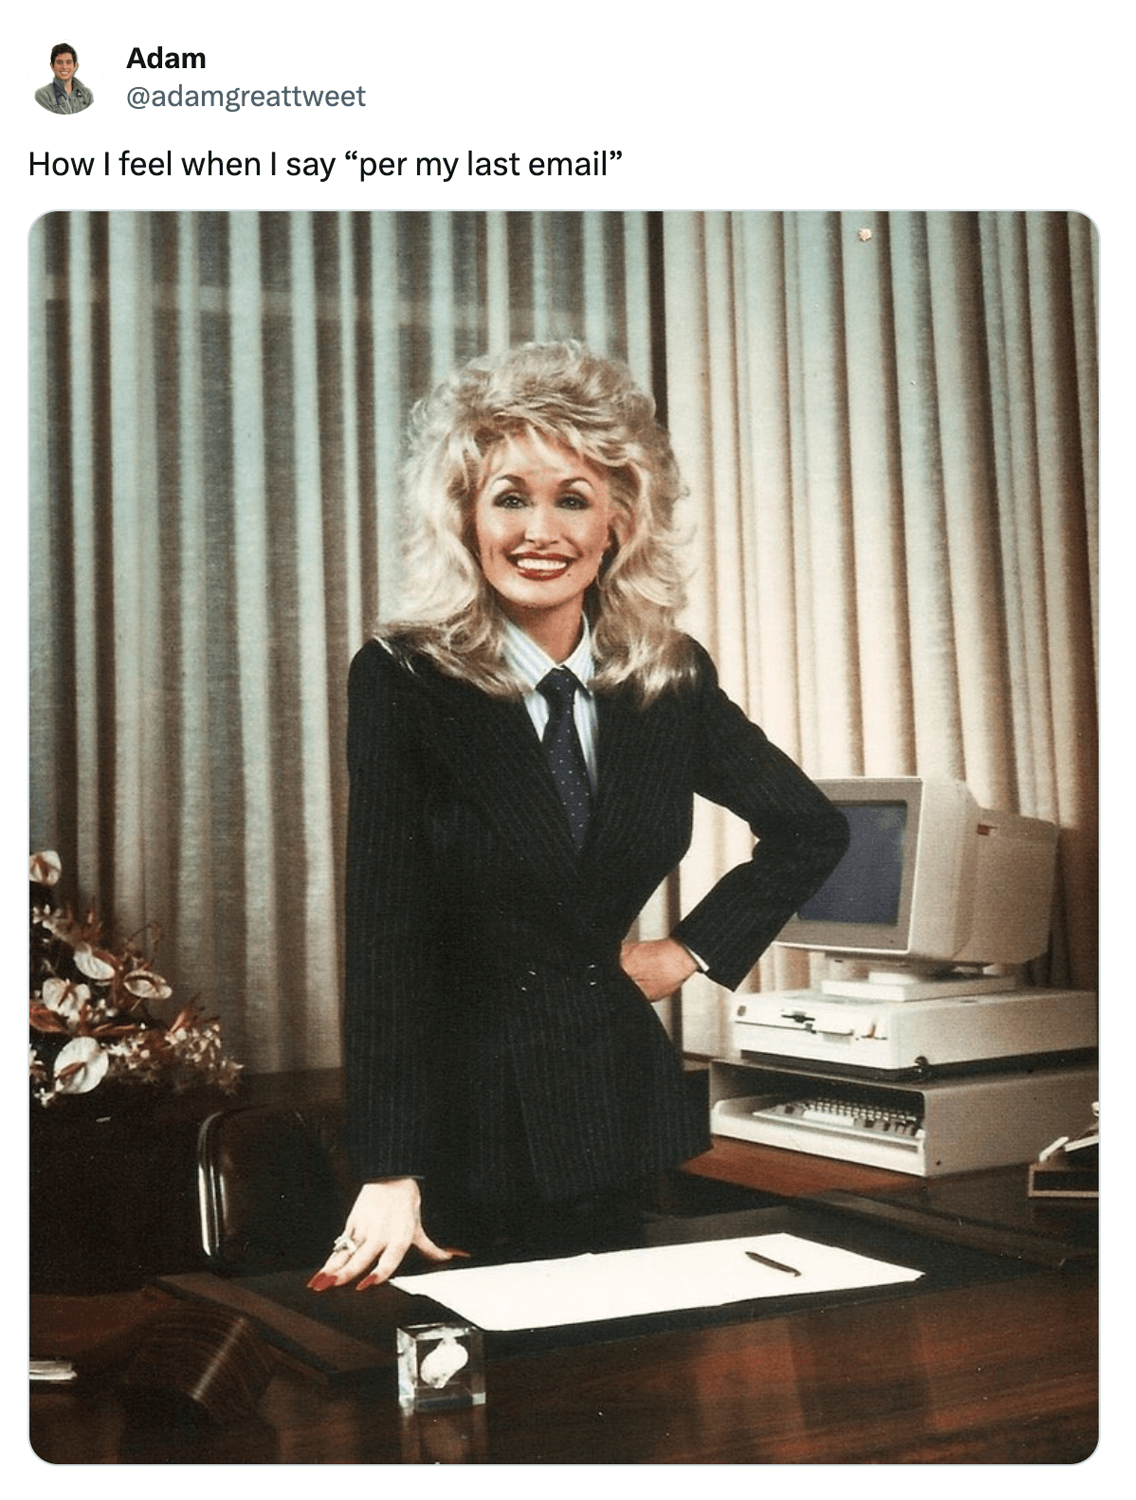 Adam @adamgreattweet on X says, 'How I feel when I say 'per my last email' with a picture of Dolly Parton in a suit in an office setting